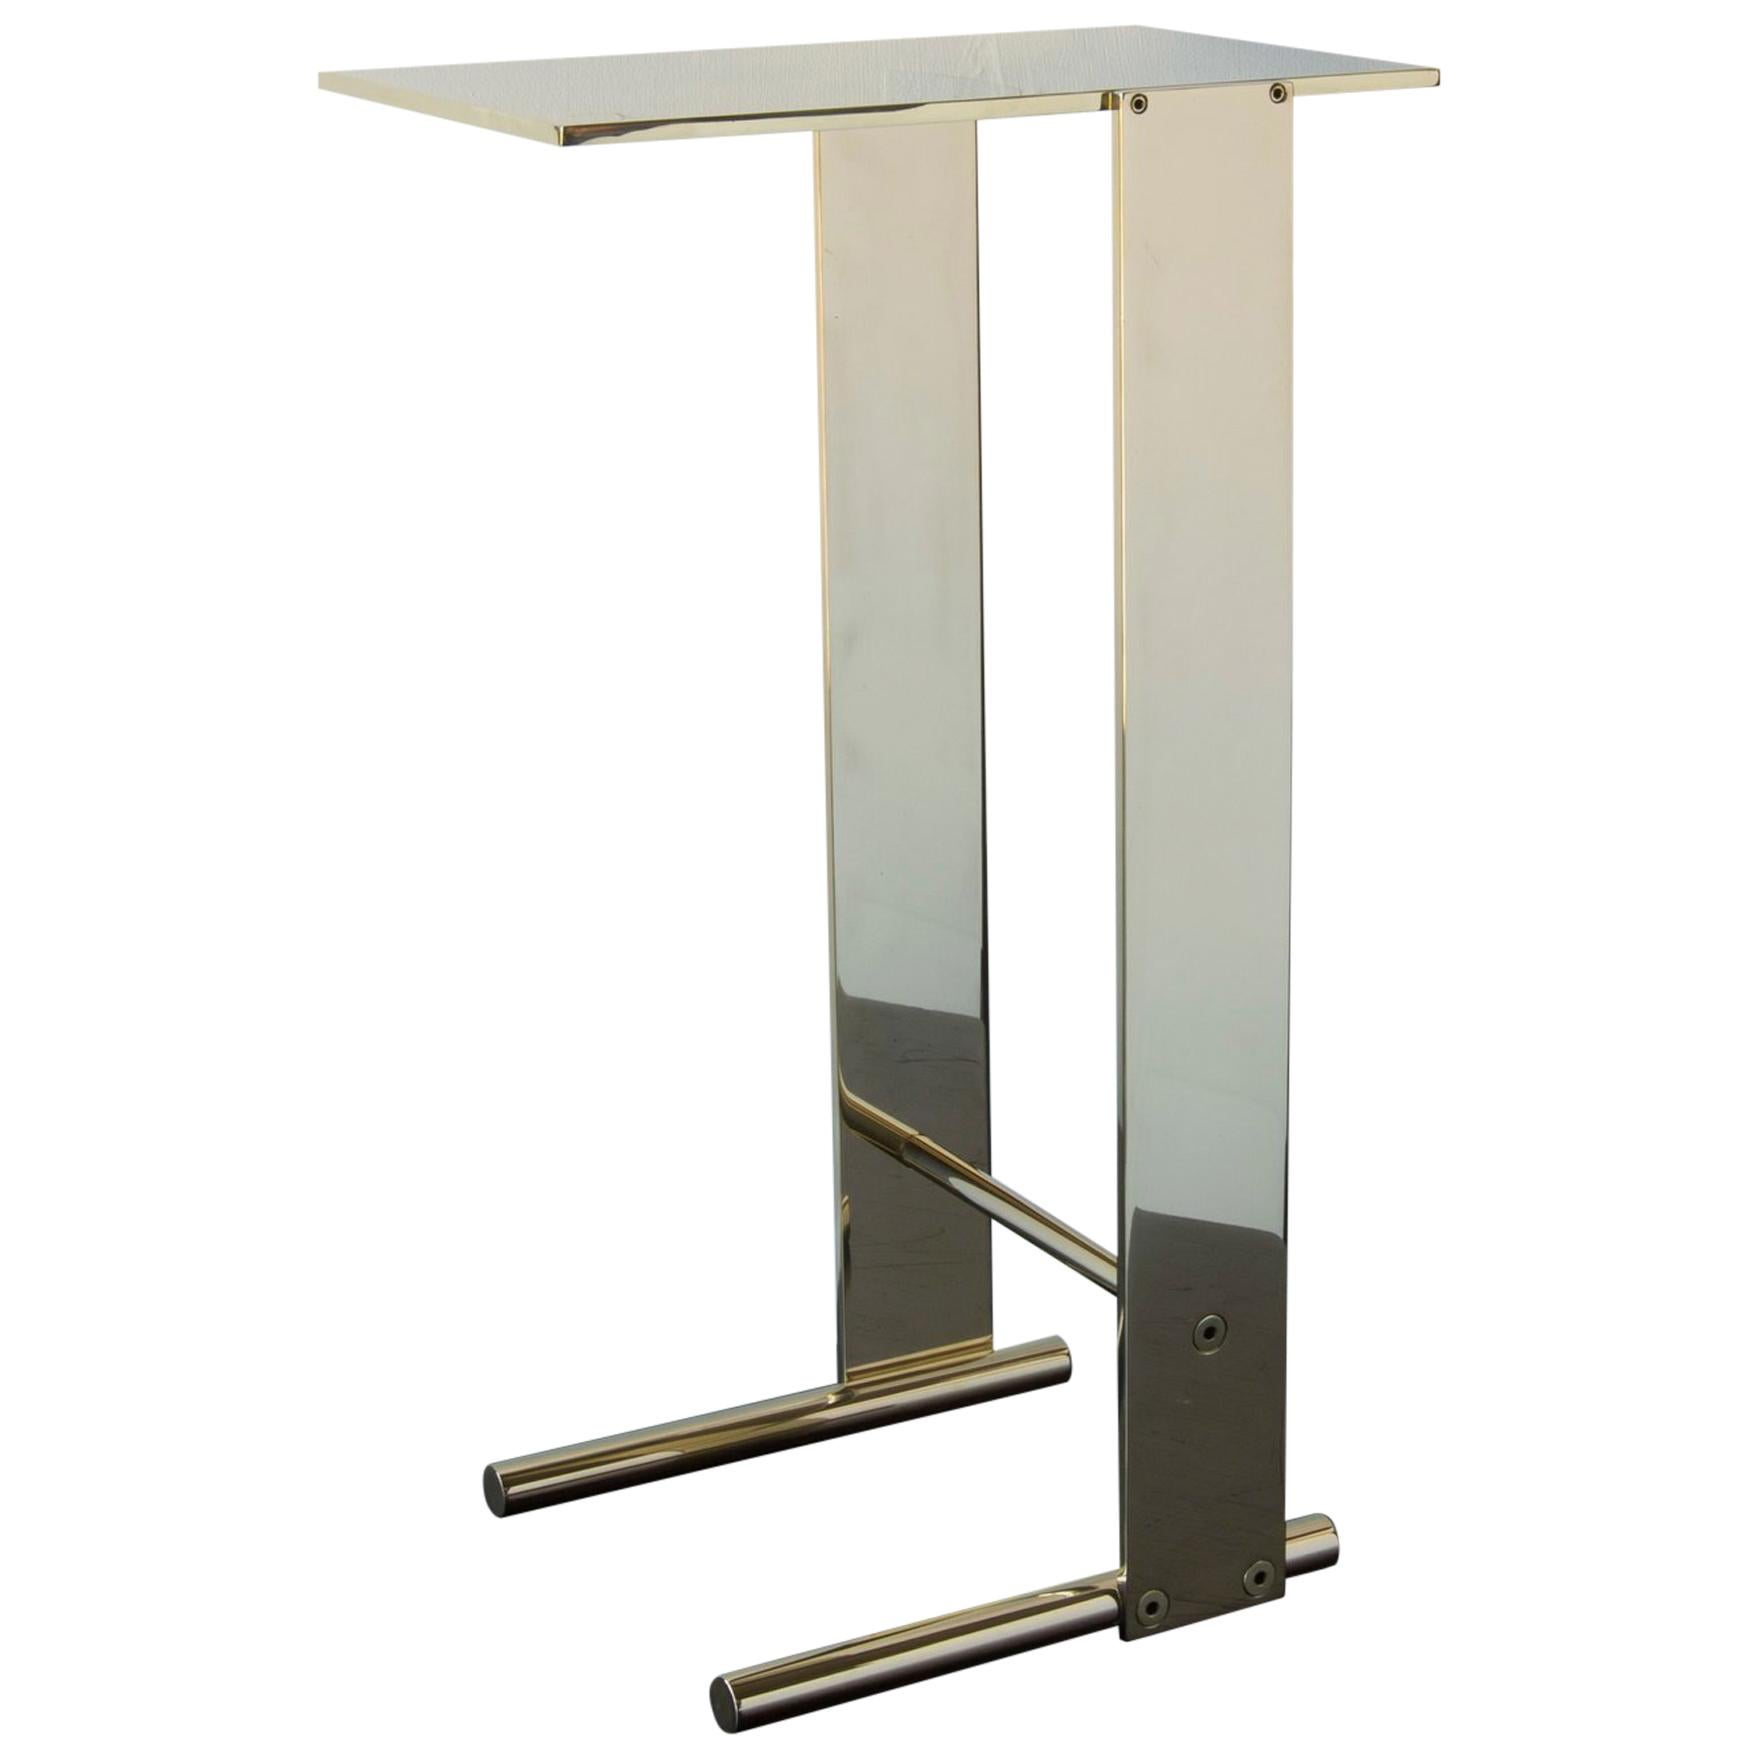 Untitled Side Table Polished Unlacquered Brass Small Accent, End or Drink Stand